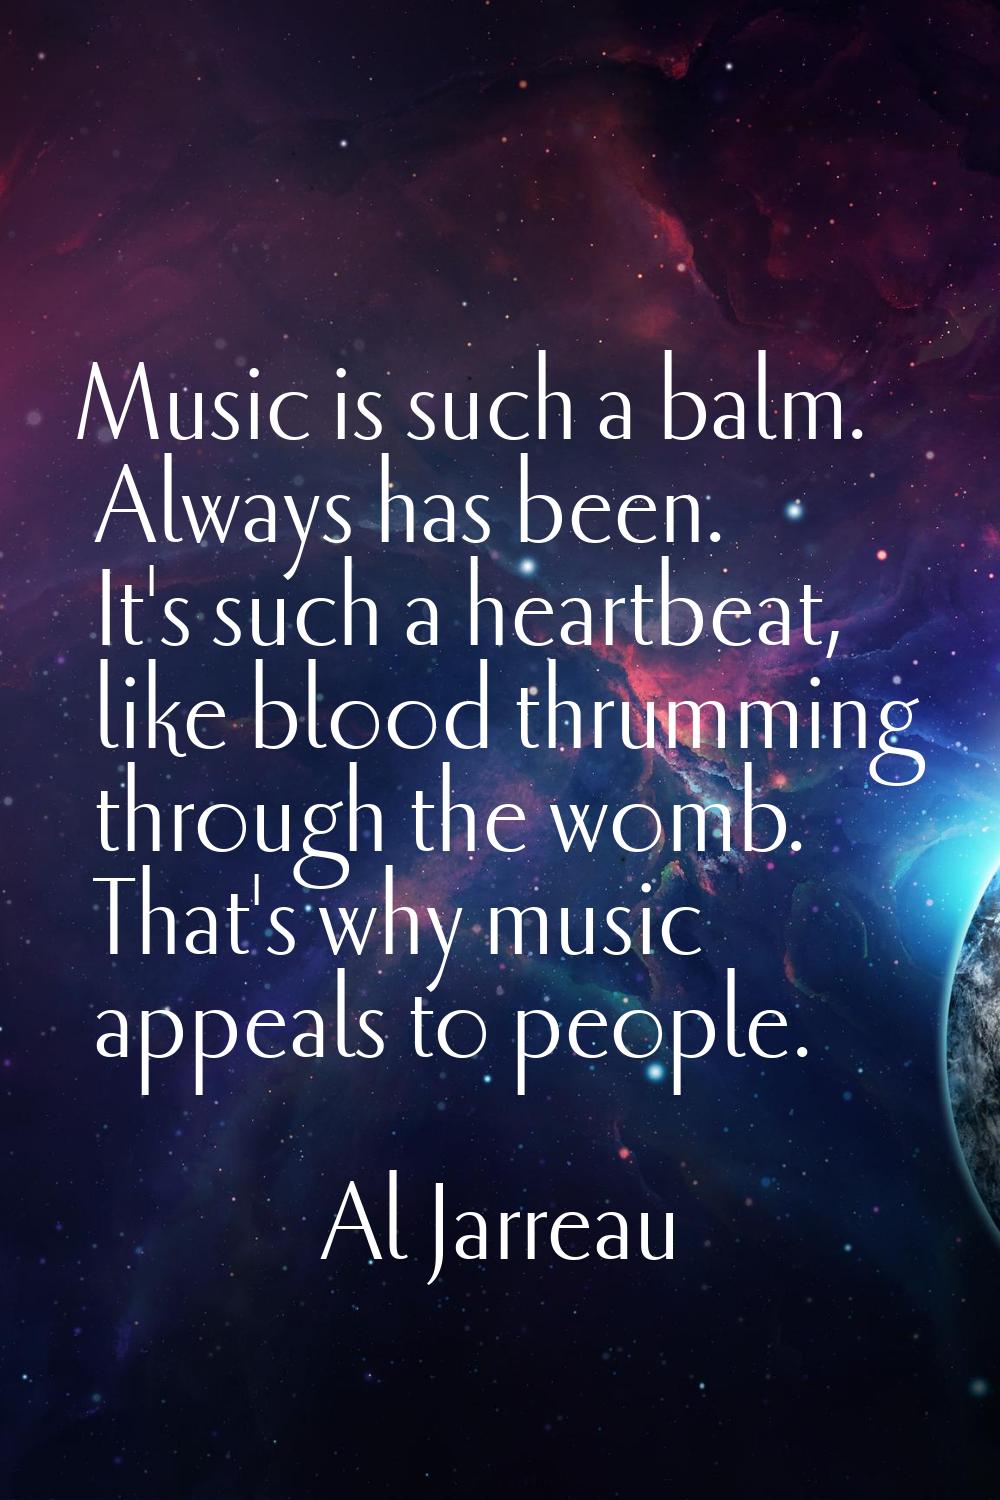 Music is such a balm. Always has been. It's such a heartbeat, like blood thrumming through the womb